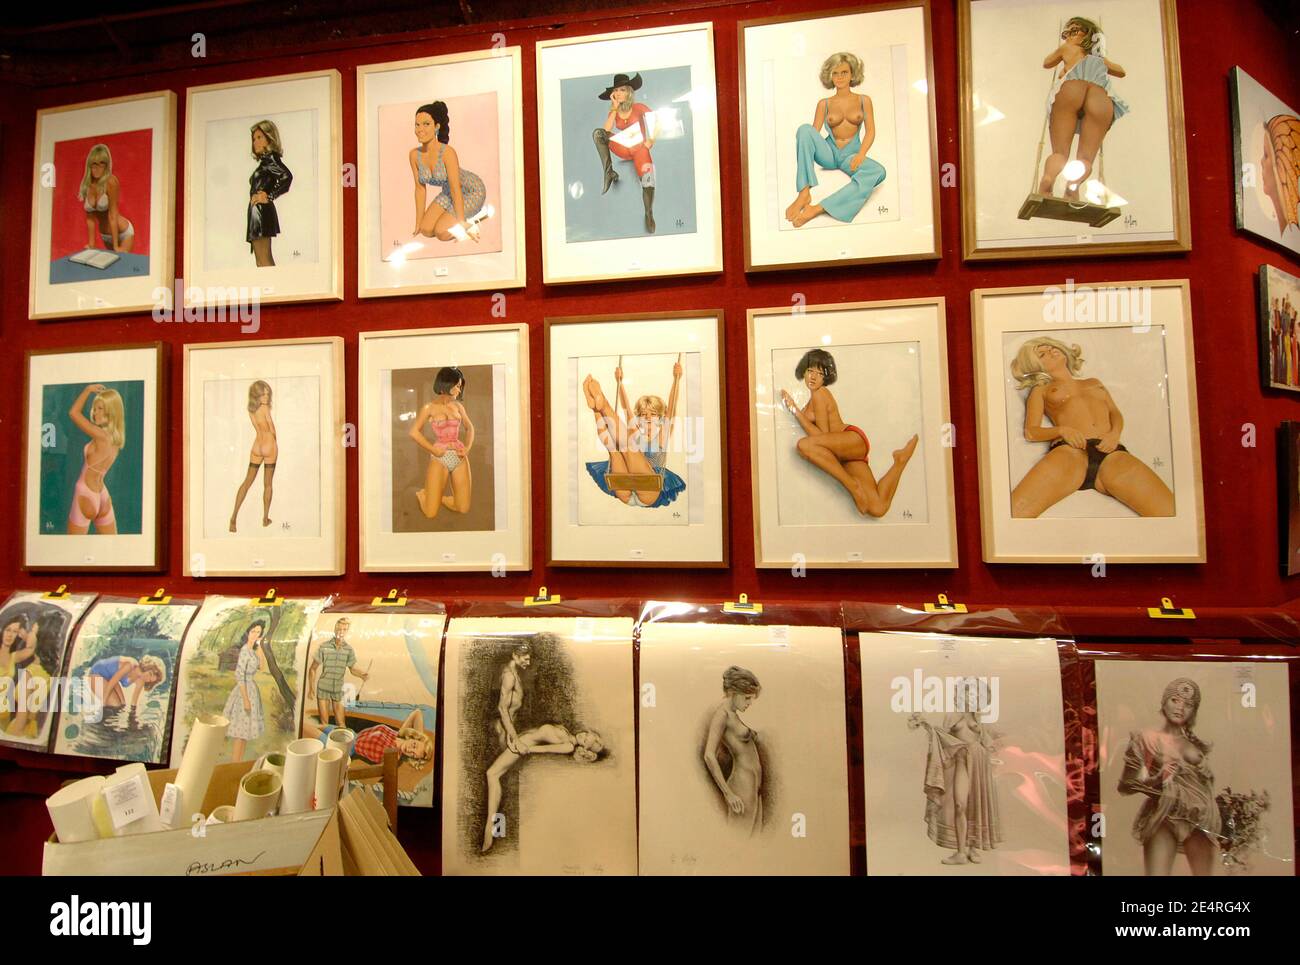 Pin Up collection by French artist Aslan, auctioned in the Hotel Drouot in  Paris, France, on March 14, 2008. Photo by Giancarlo  Gorassini/ABACAPRESS.COM Stock Photo - Alamy